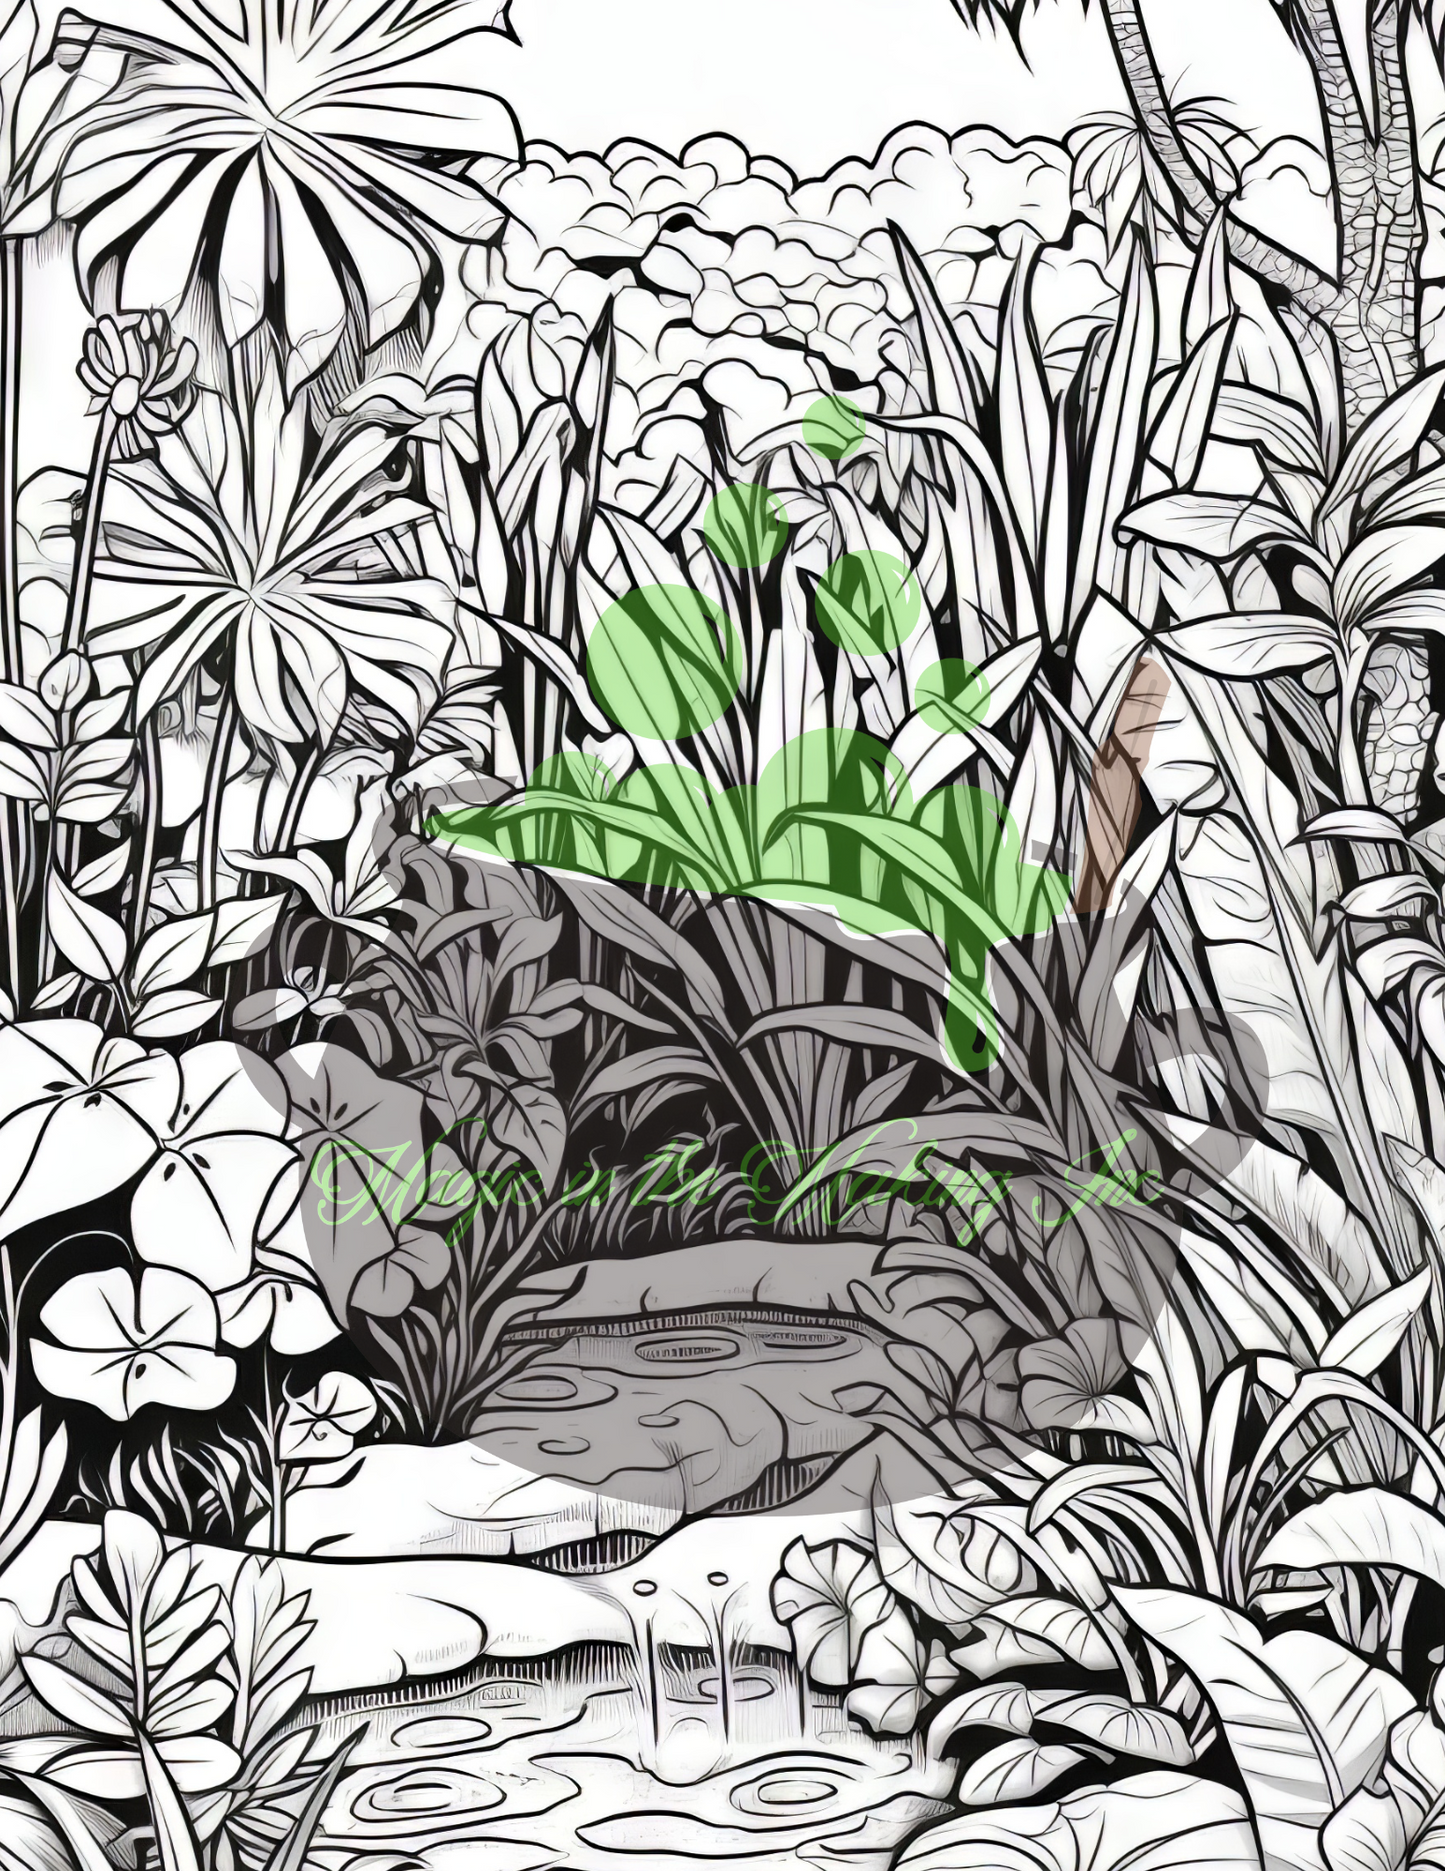 The Mindfulness Garden Coloring Book - Digital Edition